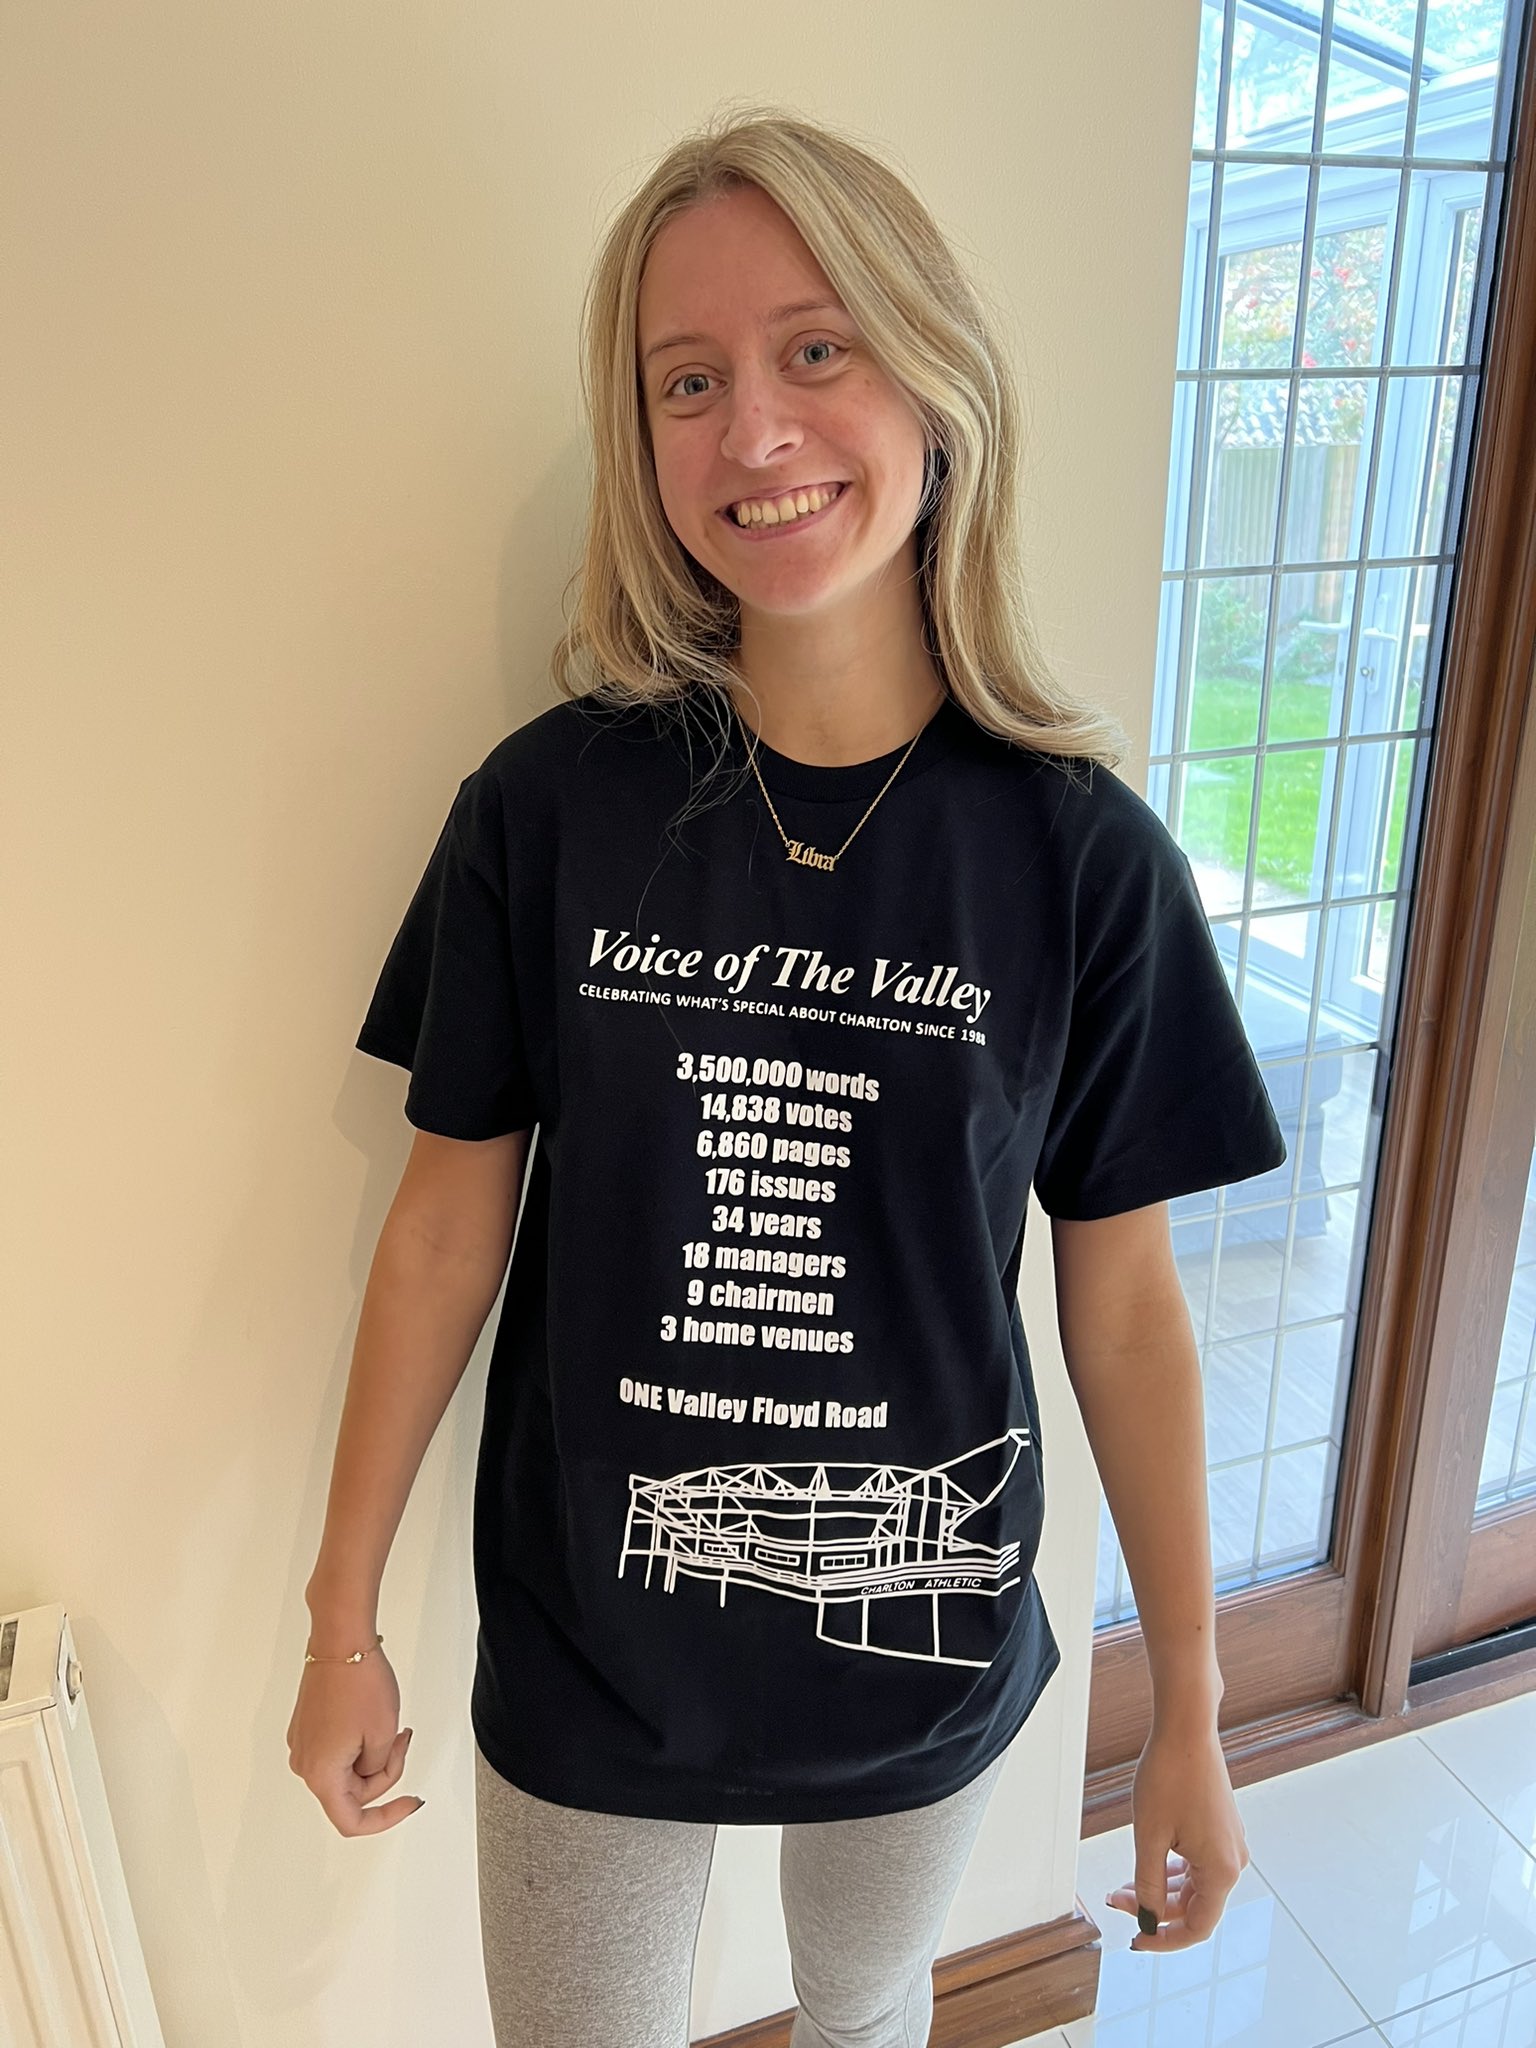 Voice of The Valley final issue souvenir T-shirt